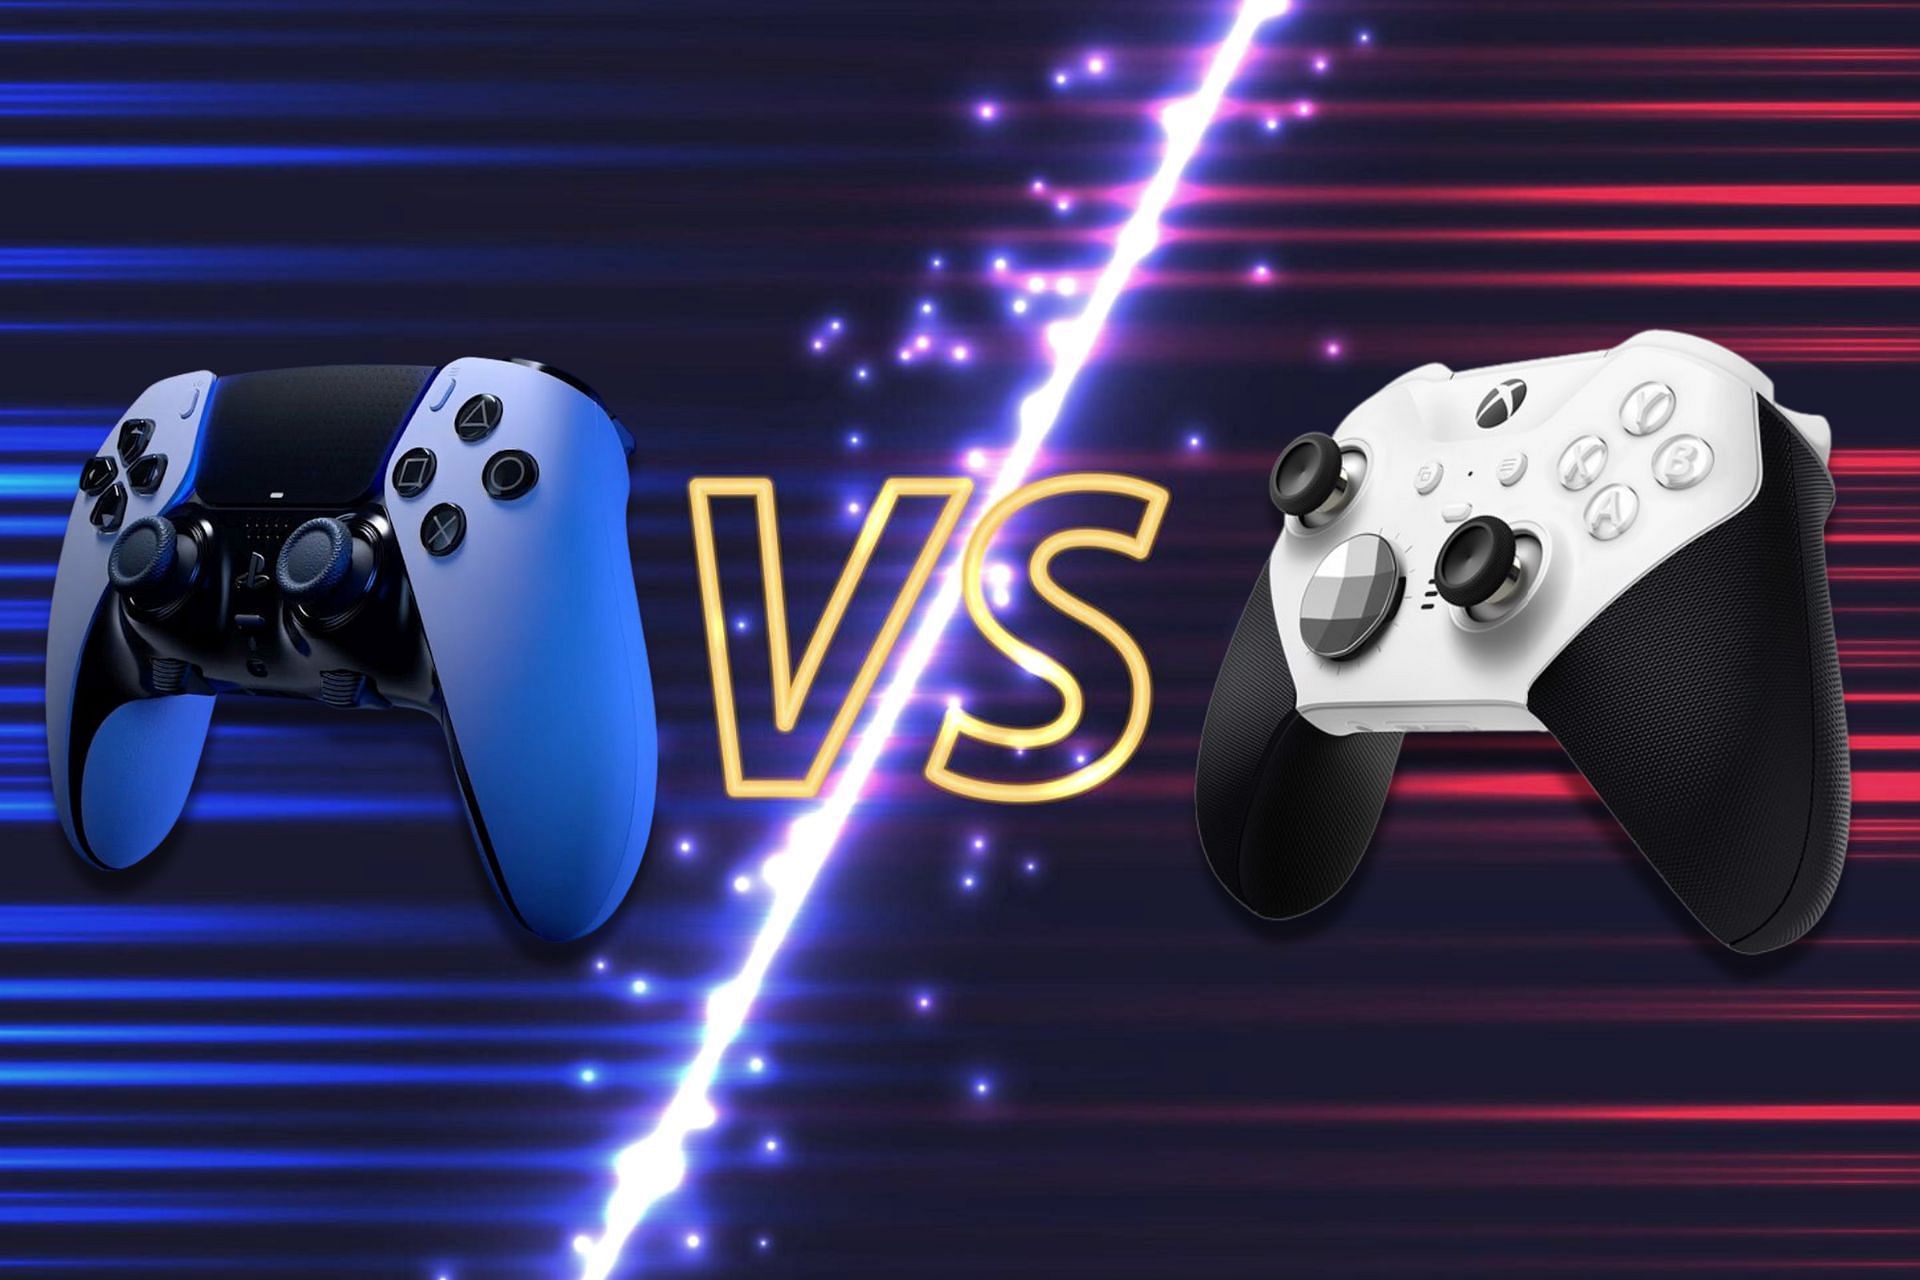 Both the latest controllers have different strengths (Image by Sportskeeda)